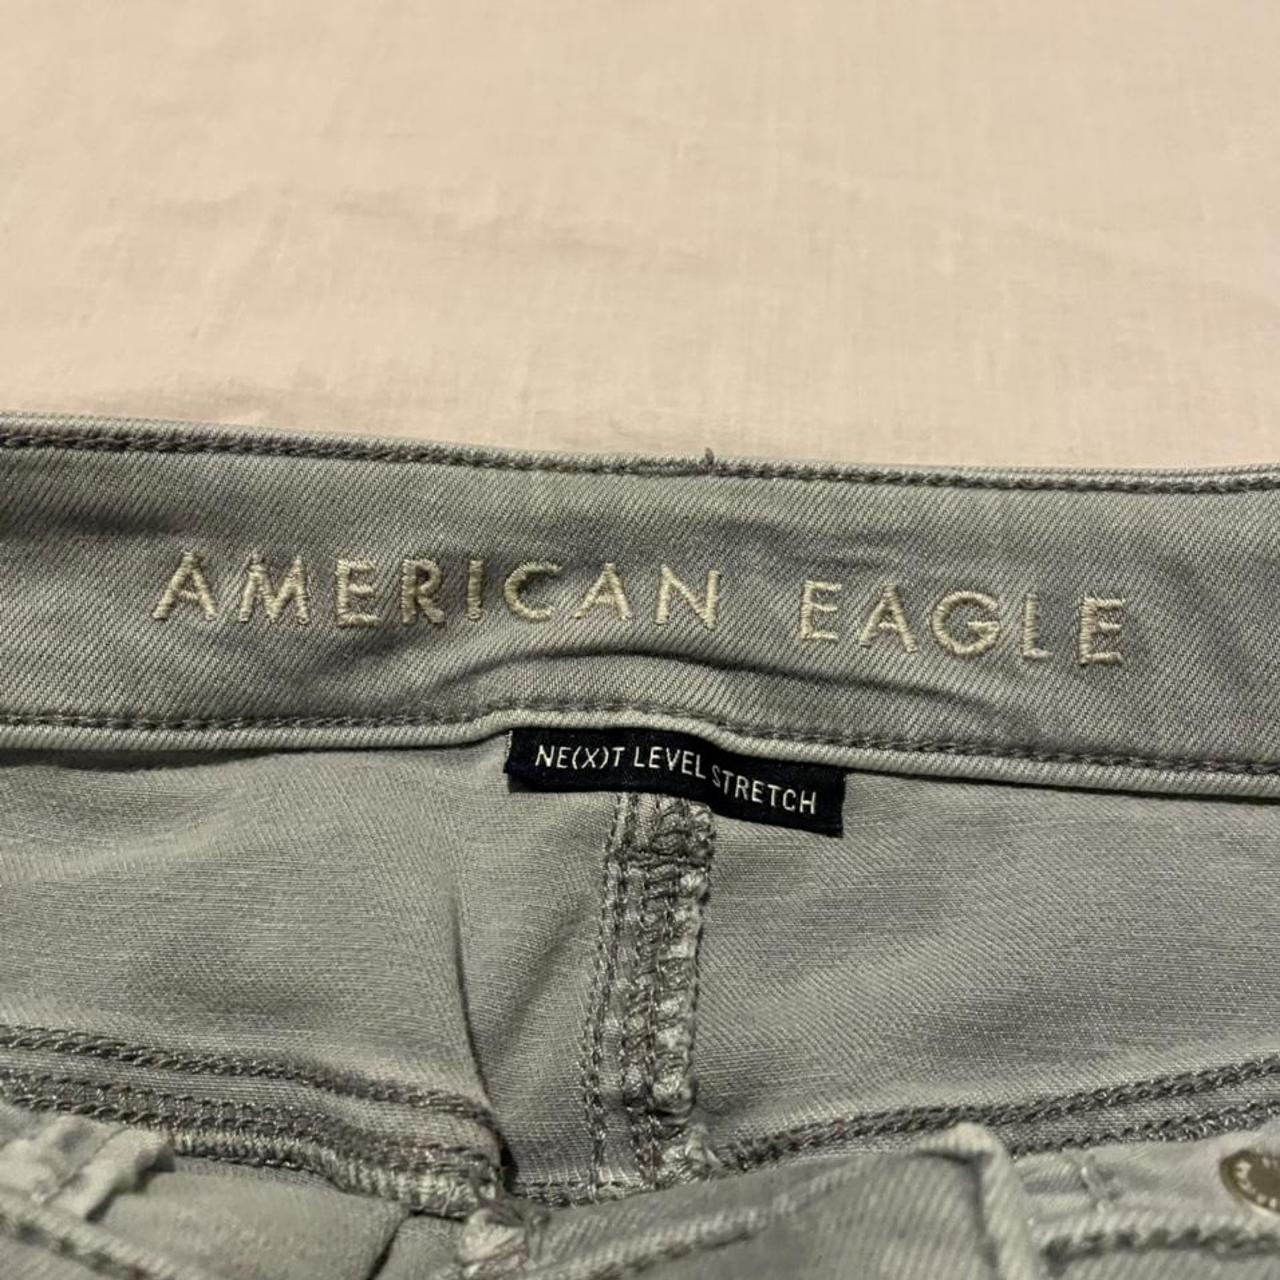 Product Image 3 - ✨American Eagle Jeggings✨

Grey Jeggings, high